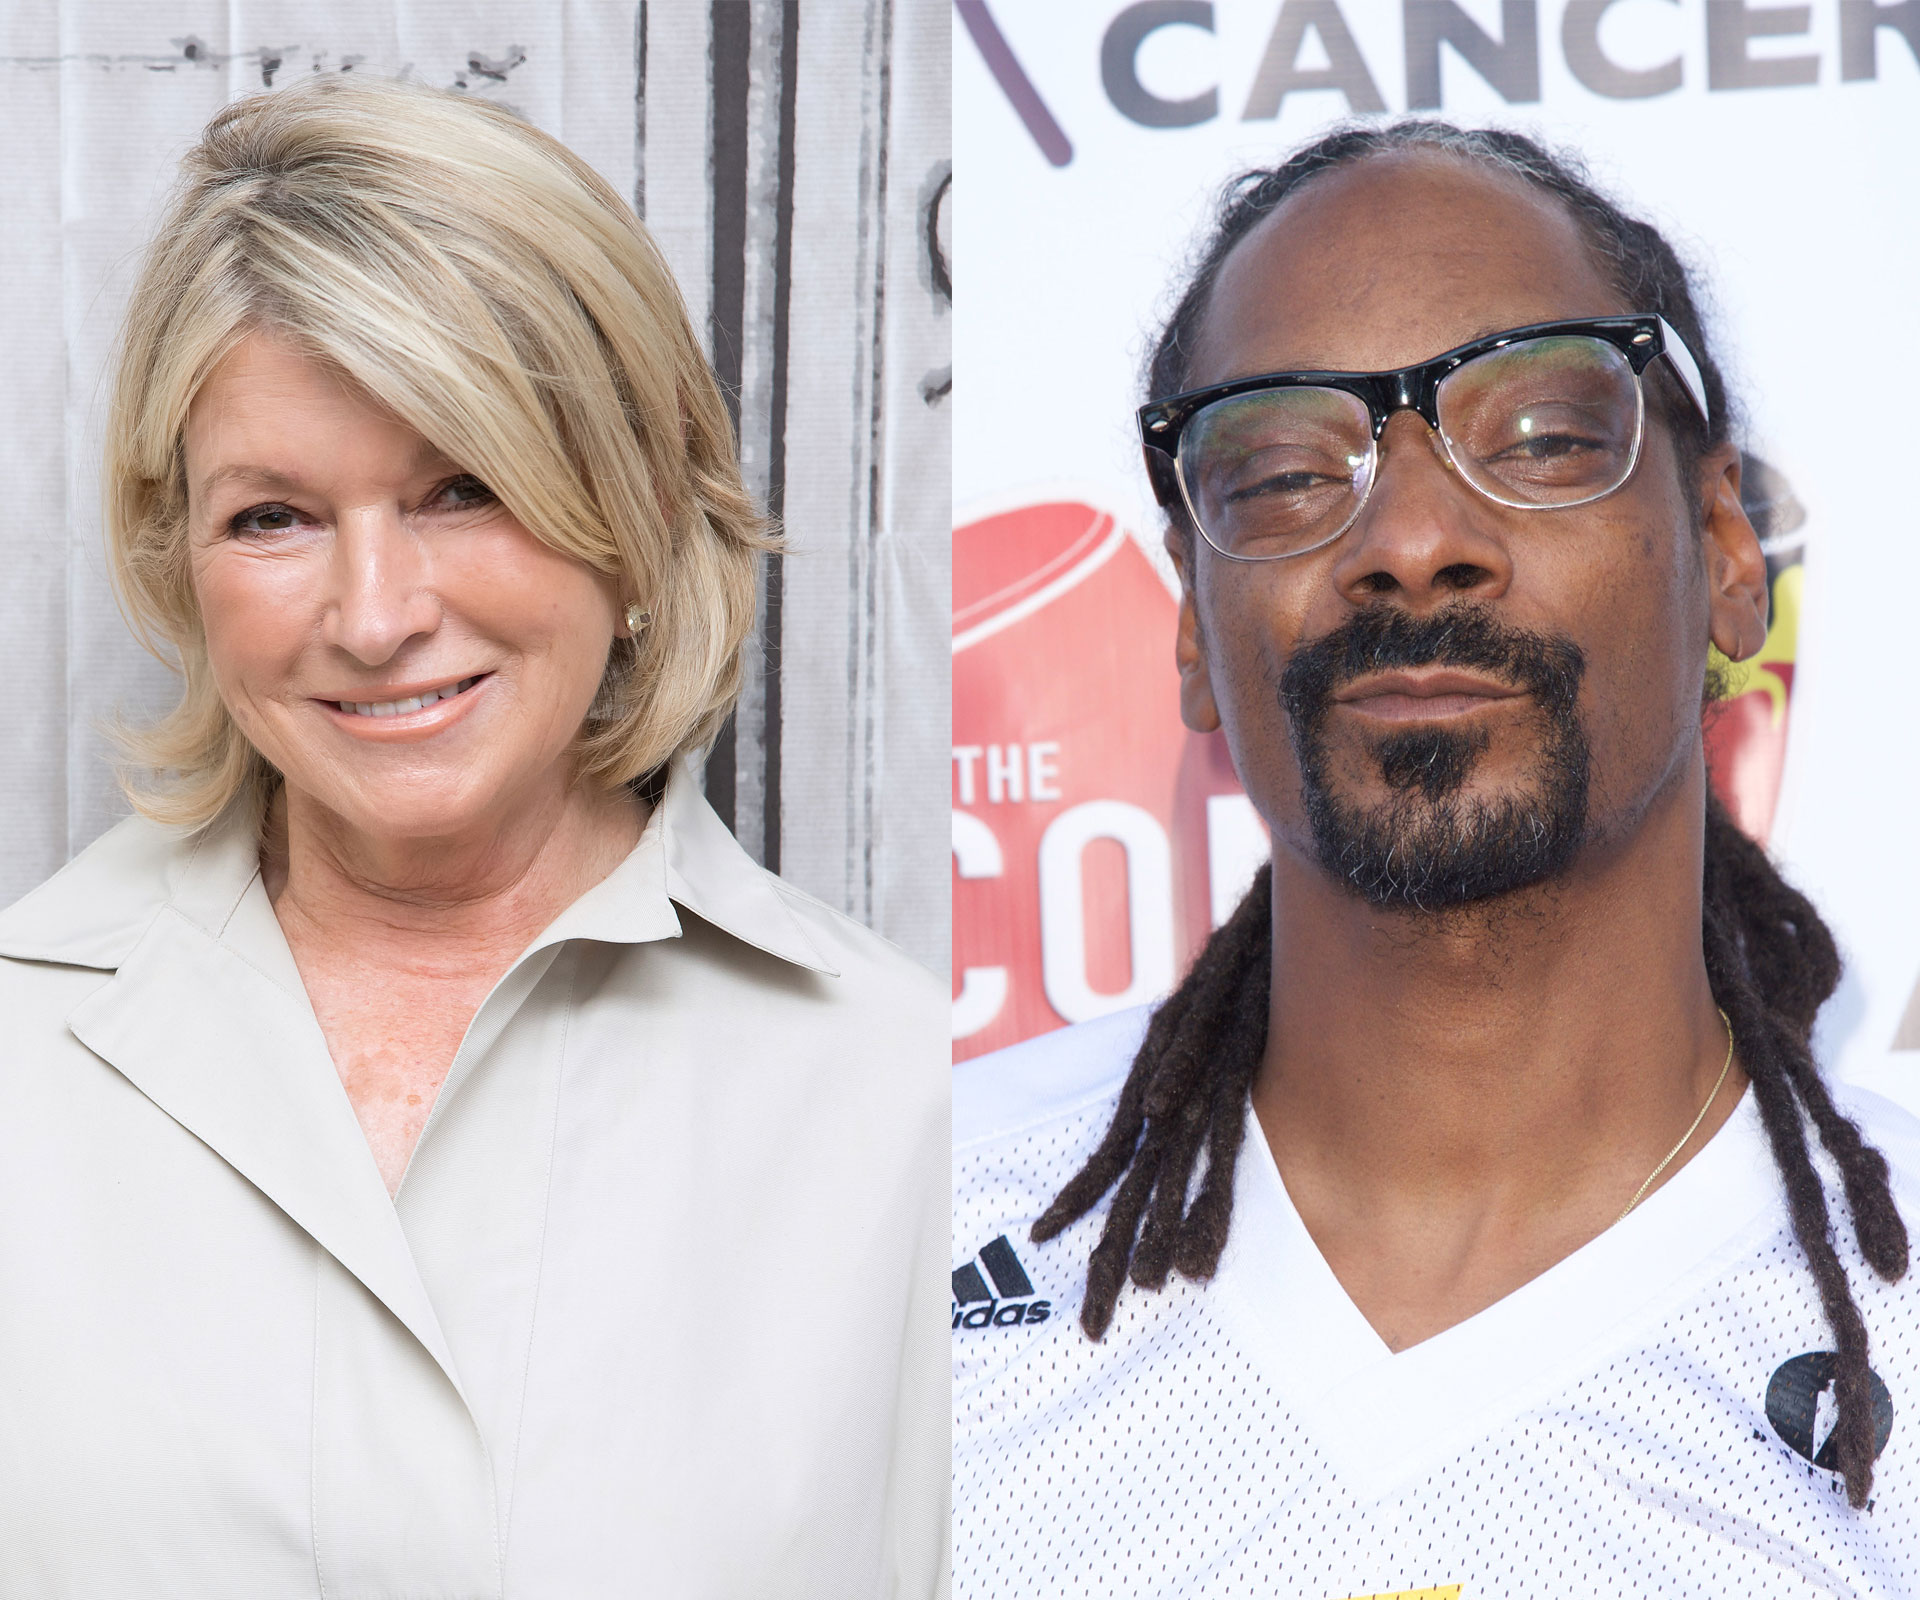 Snoop Dogg and Martha Stewart to host their own cooking show together